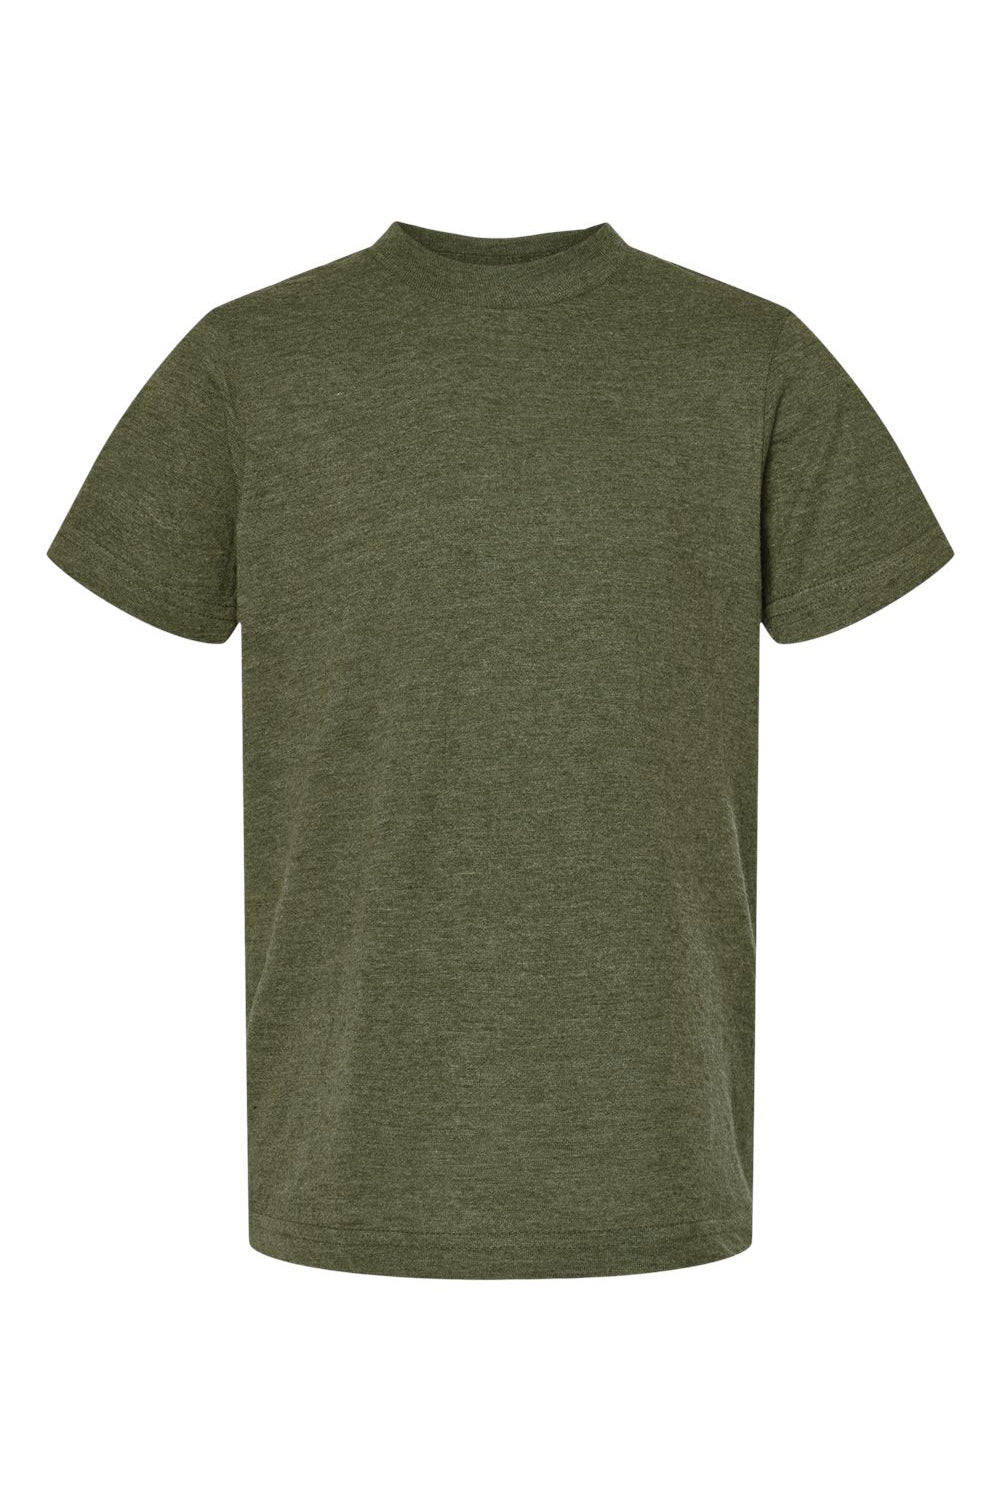 Tultex 235 Youth Fine Jersey Short Sleeve Crewneck T-Shirt Heather Military Green Flat Front